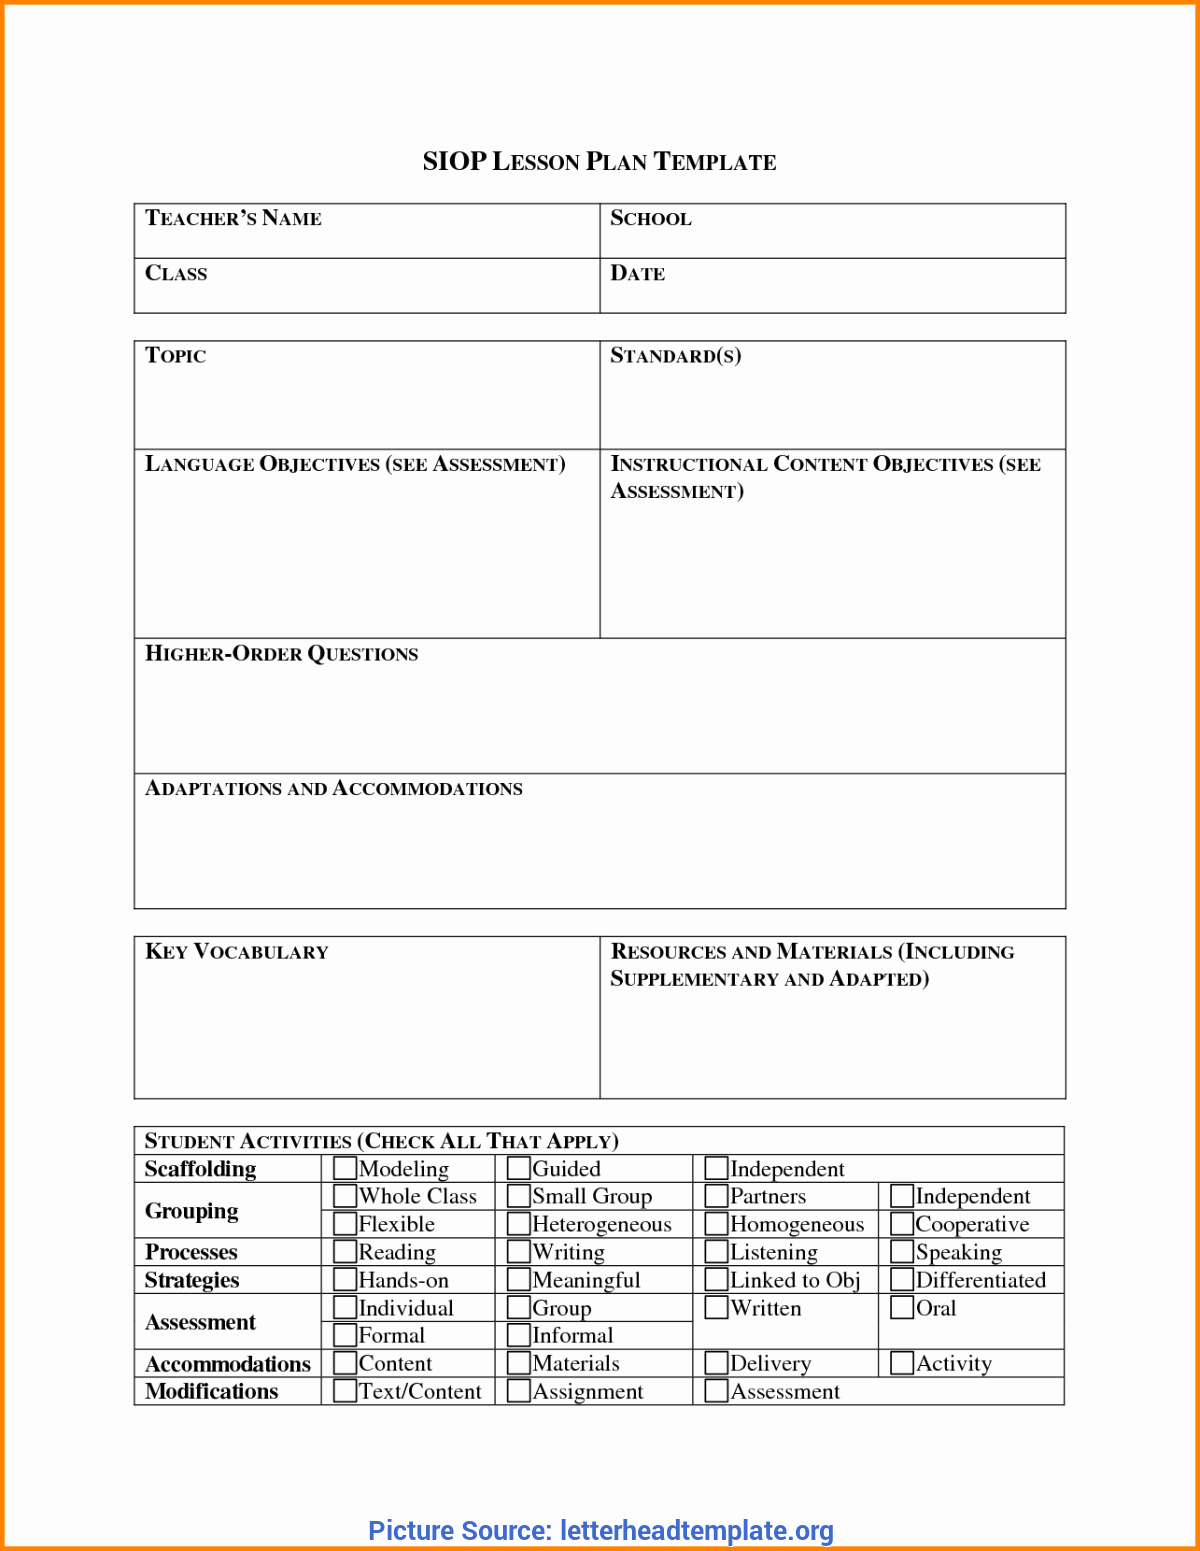 Siop Lesson Plan Template 2 Lovely Excellent 1st Grade Lesson Plans for Money Math Money